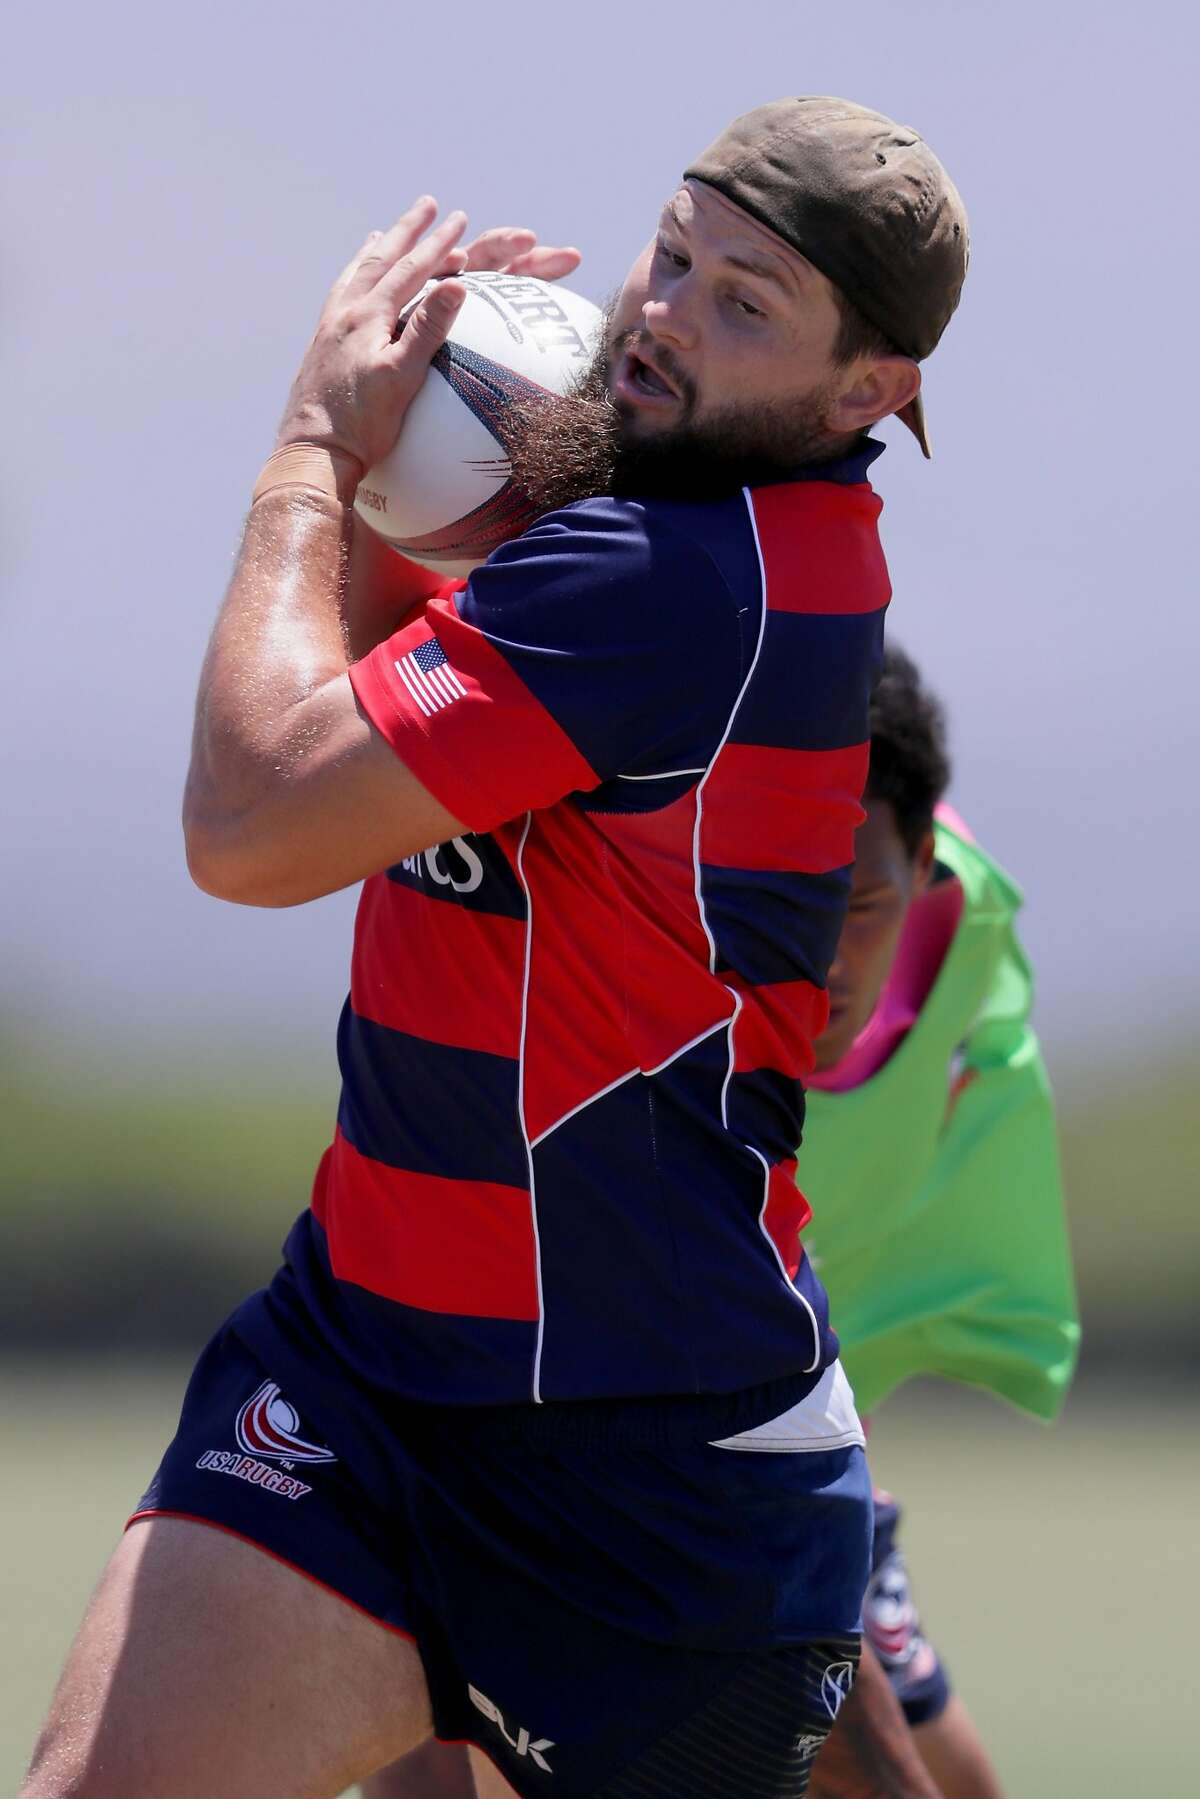 CHULA VISTA, CA - JULY 14: USA Rugby hopeful Danny Barrett runs with the ball during a training session at the Olympic Training Center on July 14, 2016 in Chula Vista, California. (Photo by Sean M. Haffey/Getty Images)